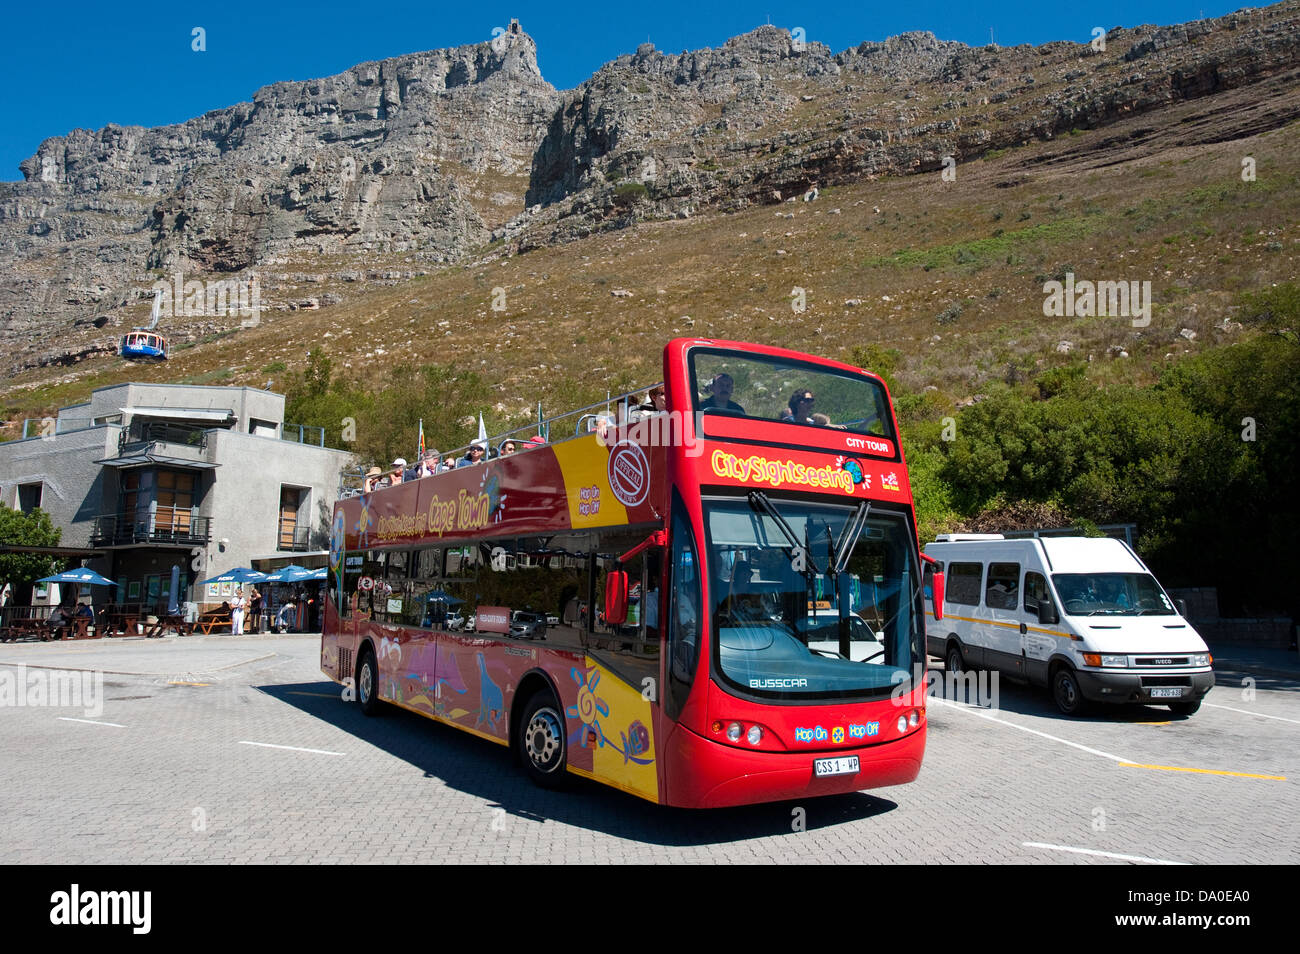 City Sightseeing bus at the Cableway Station, Cape Town, South Africa Stock Photo